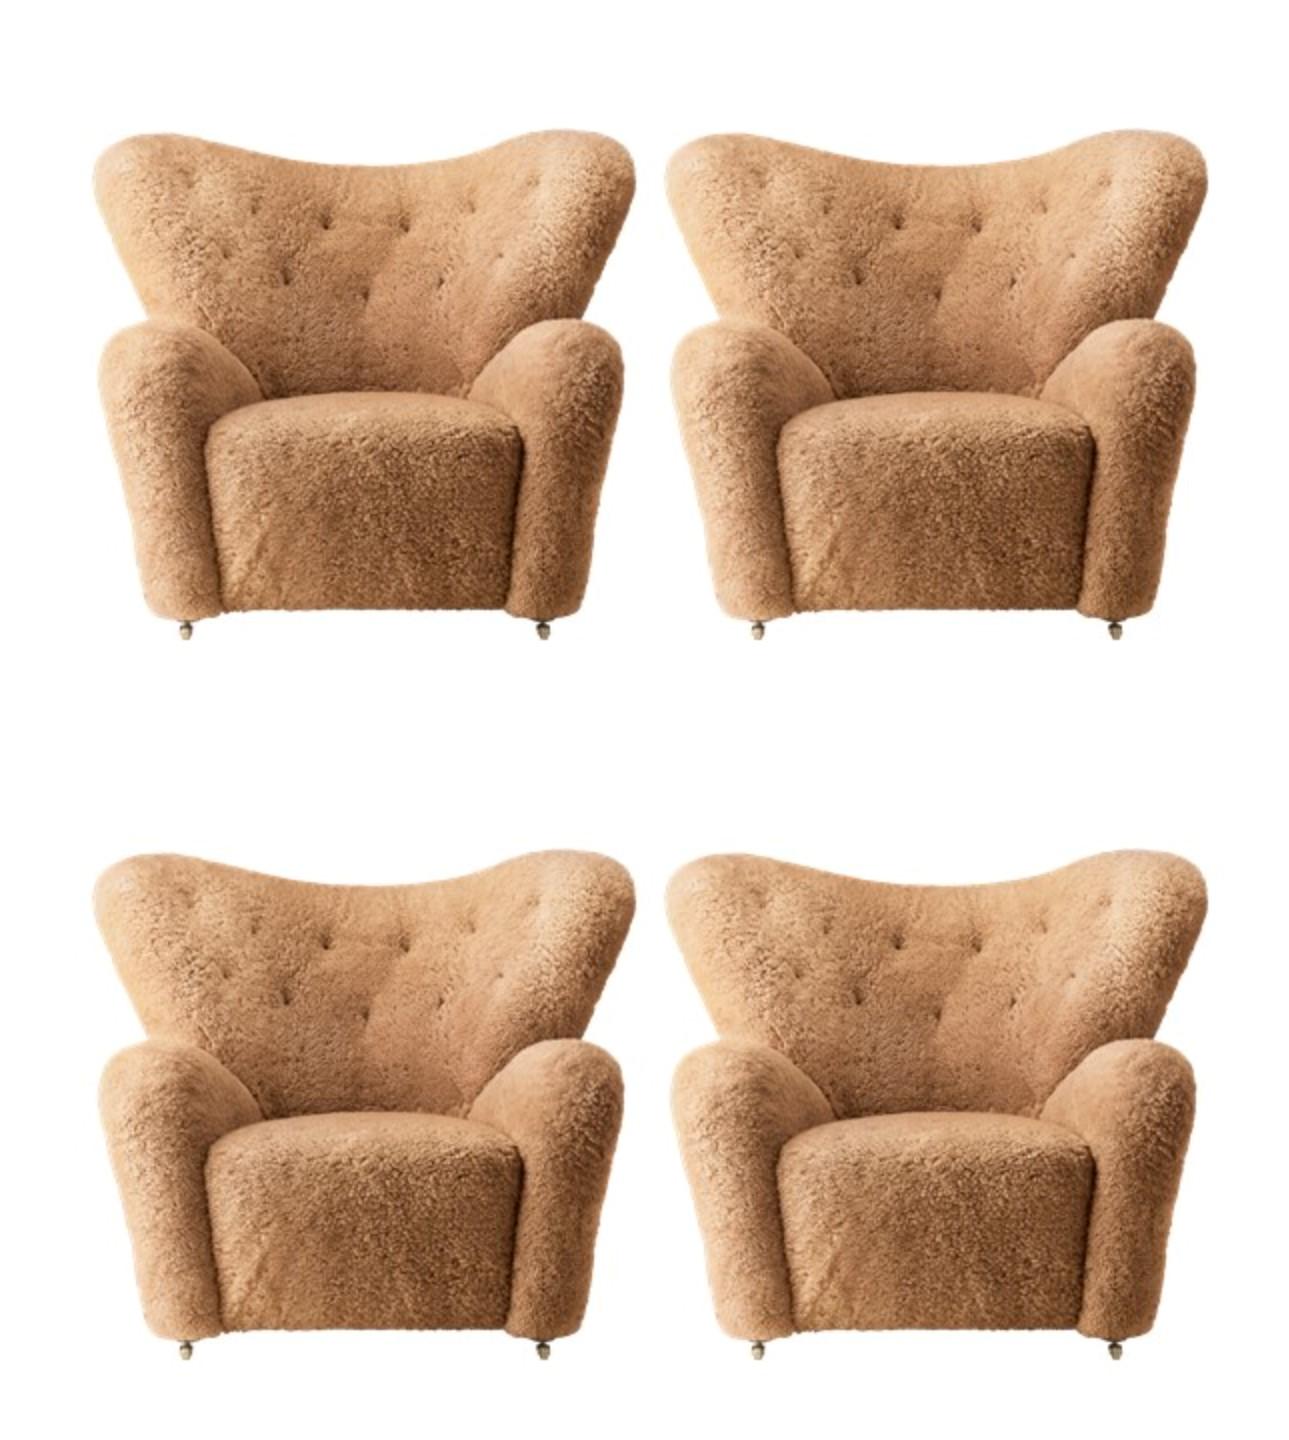 Set of 4 Honey Sheepskin The Tired Man lounge chair by Lassen
Dimensions: W 102 x D 87 x H 88 cm 
Materials: Sheepskin

Flemming Lassen designed the overstuffed easy chair, The Tired Man, for The Copenhagen Cabinetmakers’ Guild Competition in